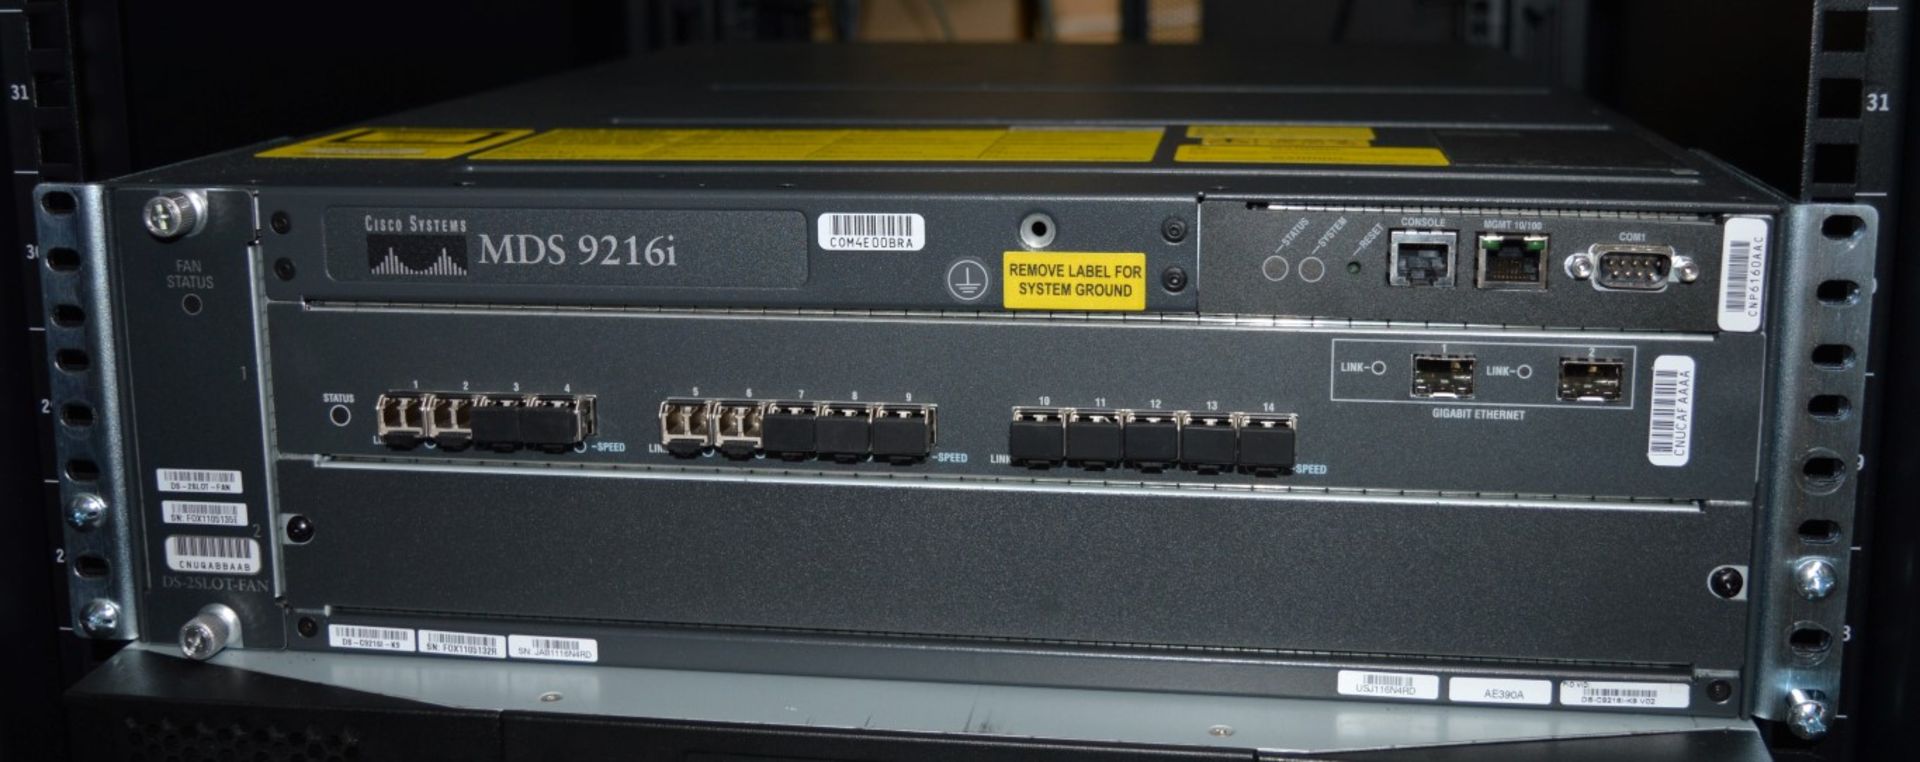 1 x Cisco Systems MDS 9216 DS-C9200 Series Multiservice Fabric Switch - Includes 14 GBIC - Image 4 of 8